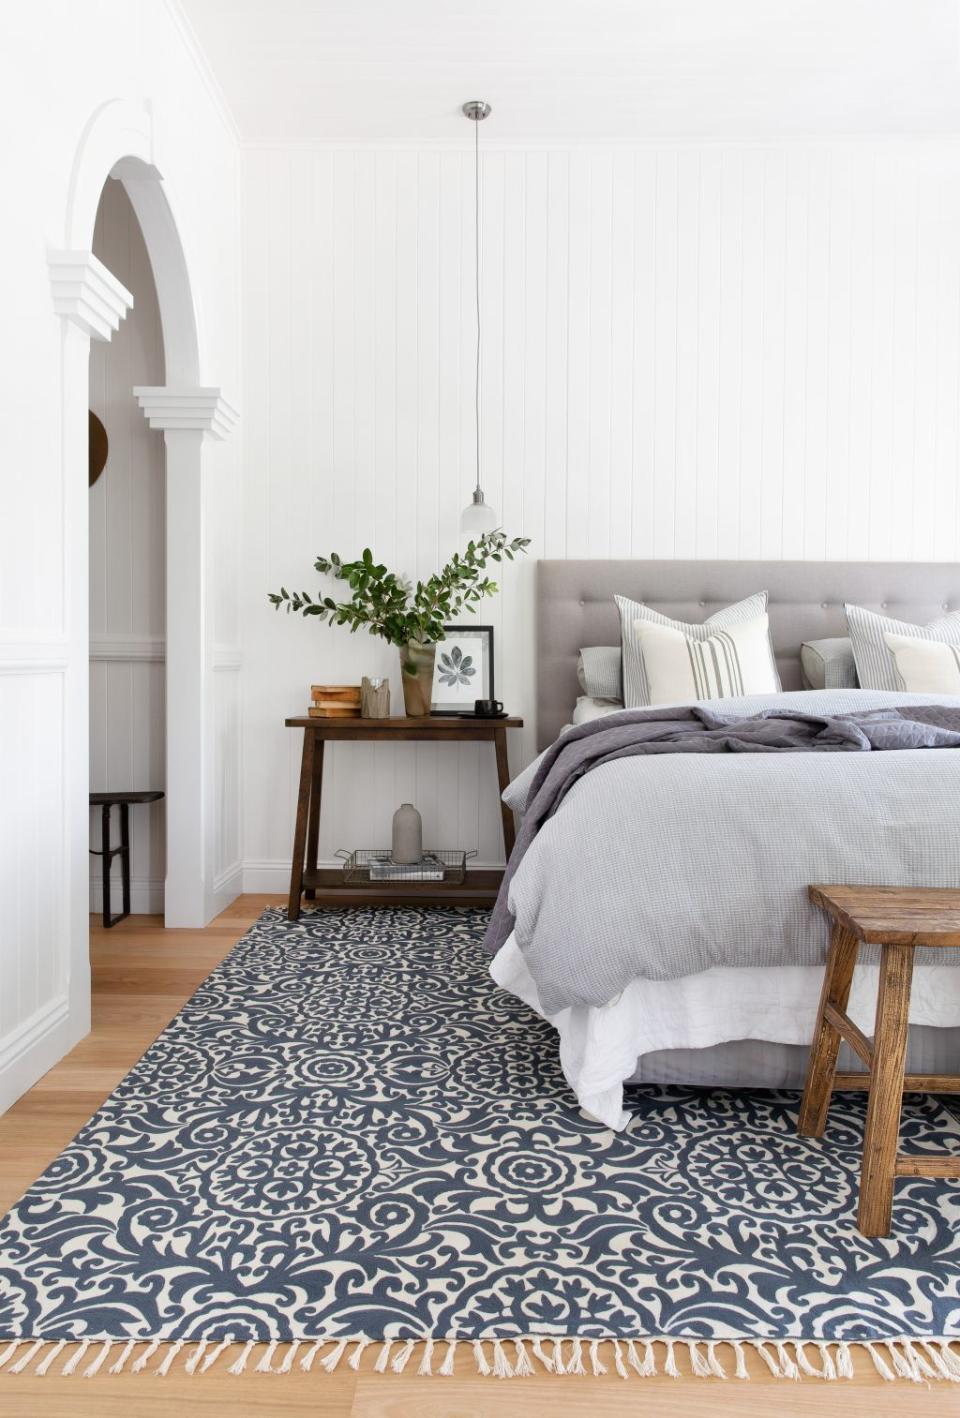 27. Add pattern to your bedroom floor with a rug